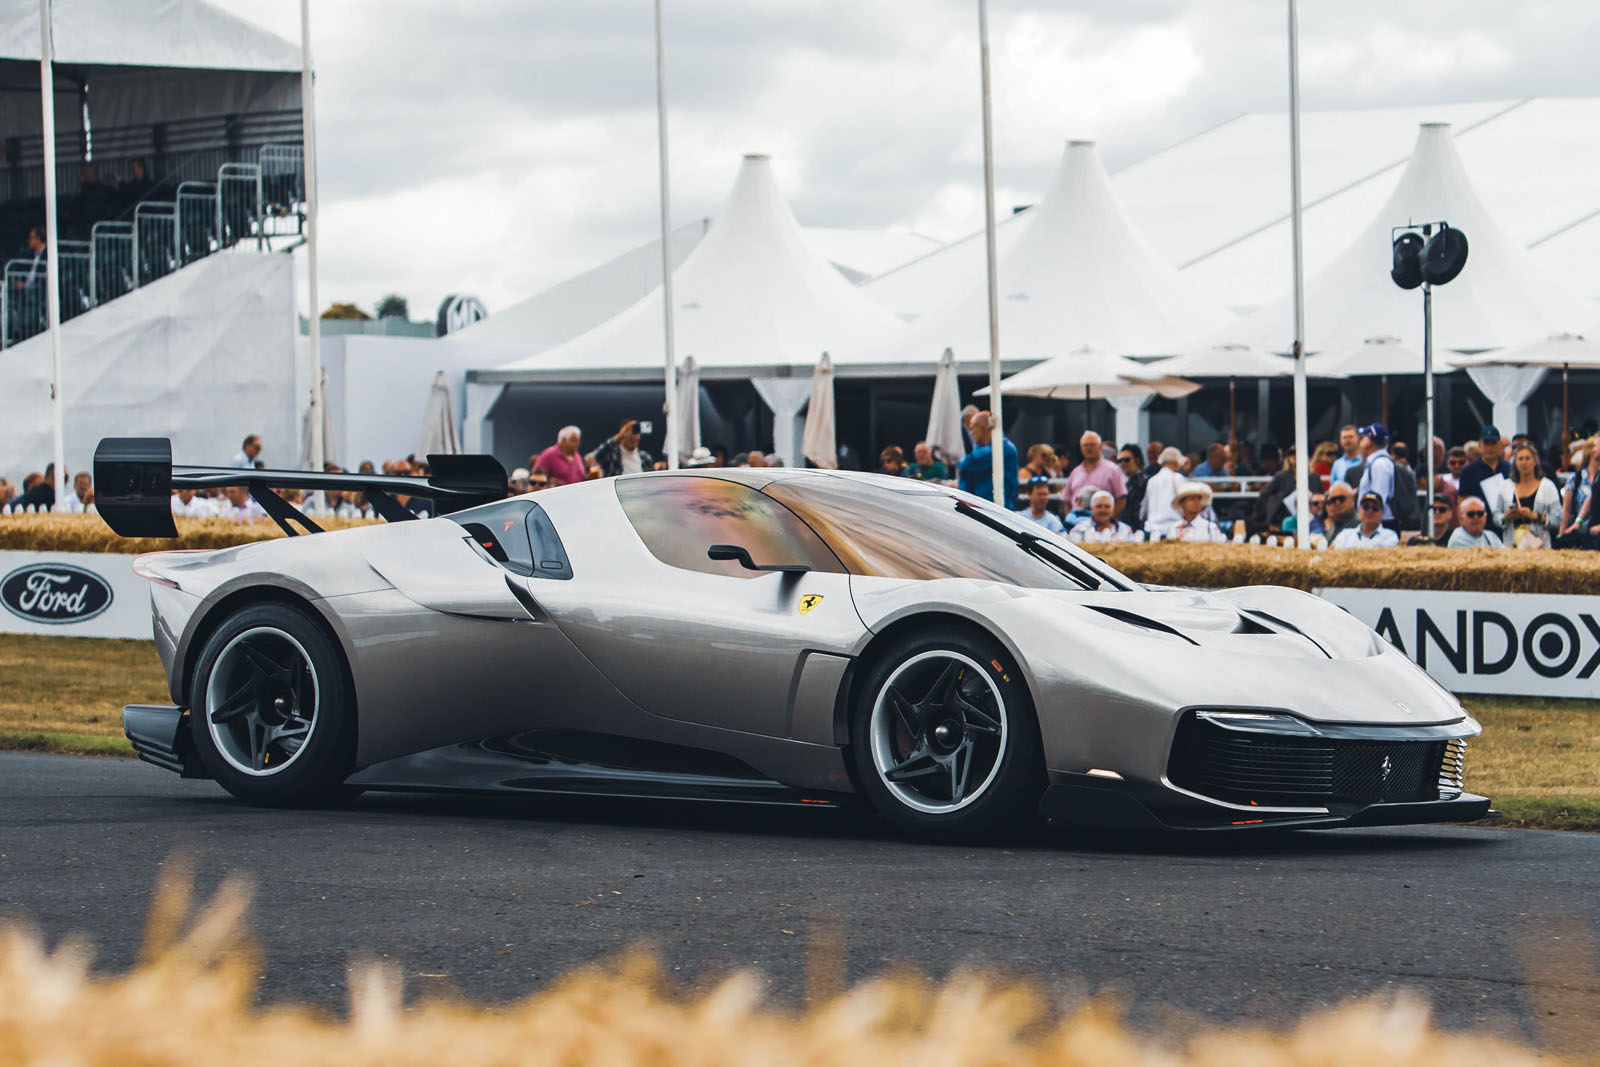 Collector Asks Ferrari to Build One-Off KC23 Racer